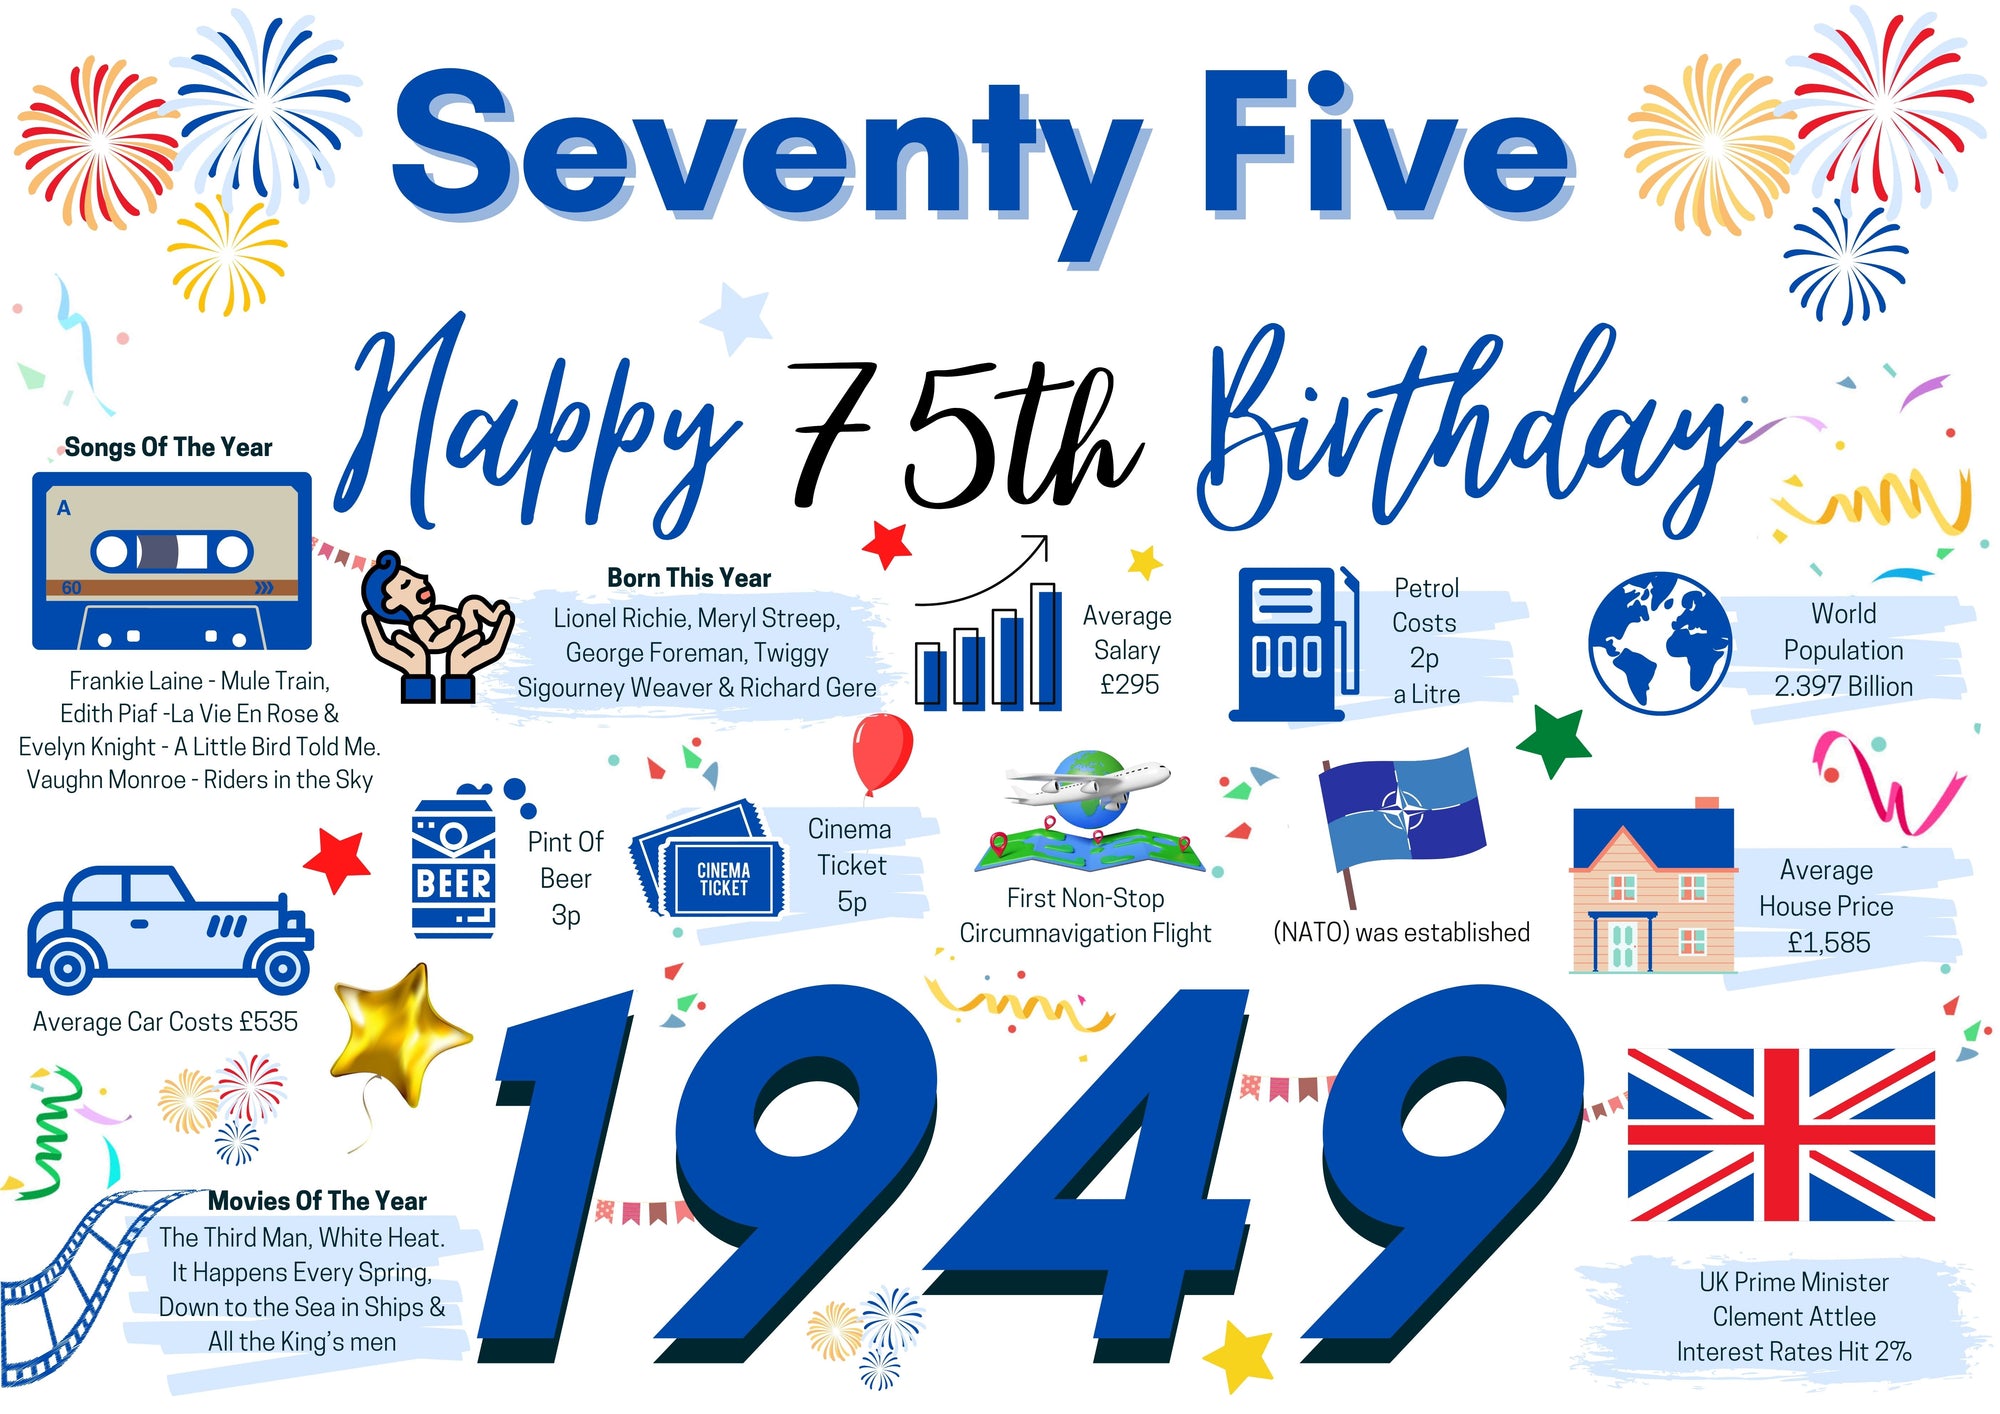 75th Birthday Card For Him, Birthday Card For Dad Brother Friend Seventy Five , 75 Happy 75th Greetings Card Born In 1949 Facts Milestone